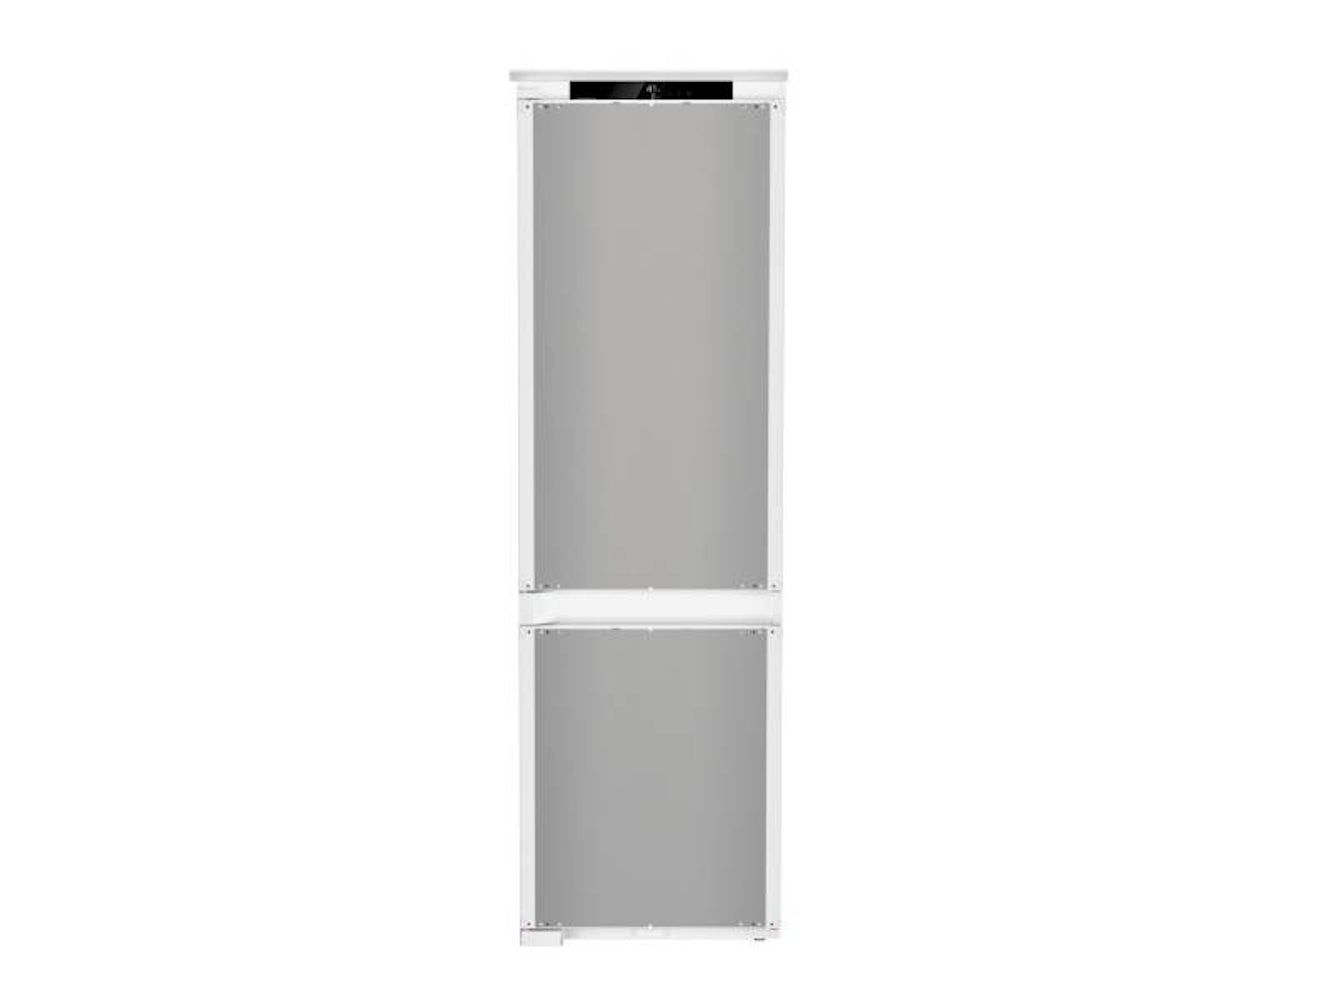 Liebherr - 21.5 Inch 8.9 cu. ft Built In / Integrated Refrigerator in Panel Ready - ICS5101